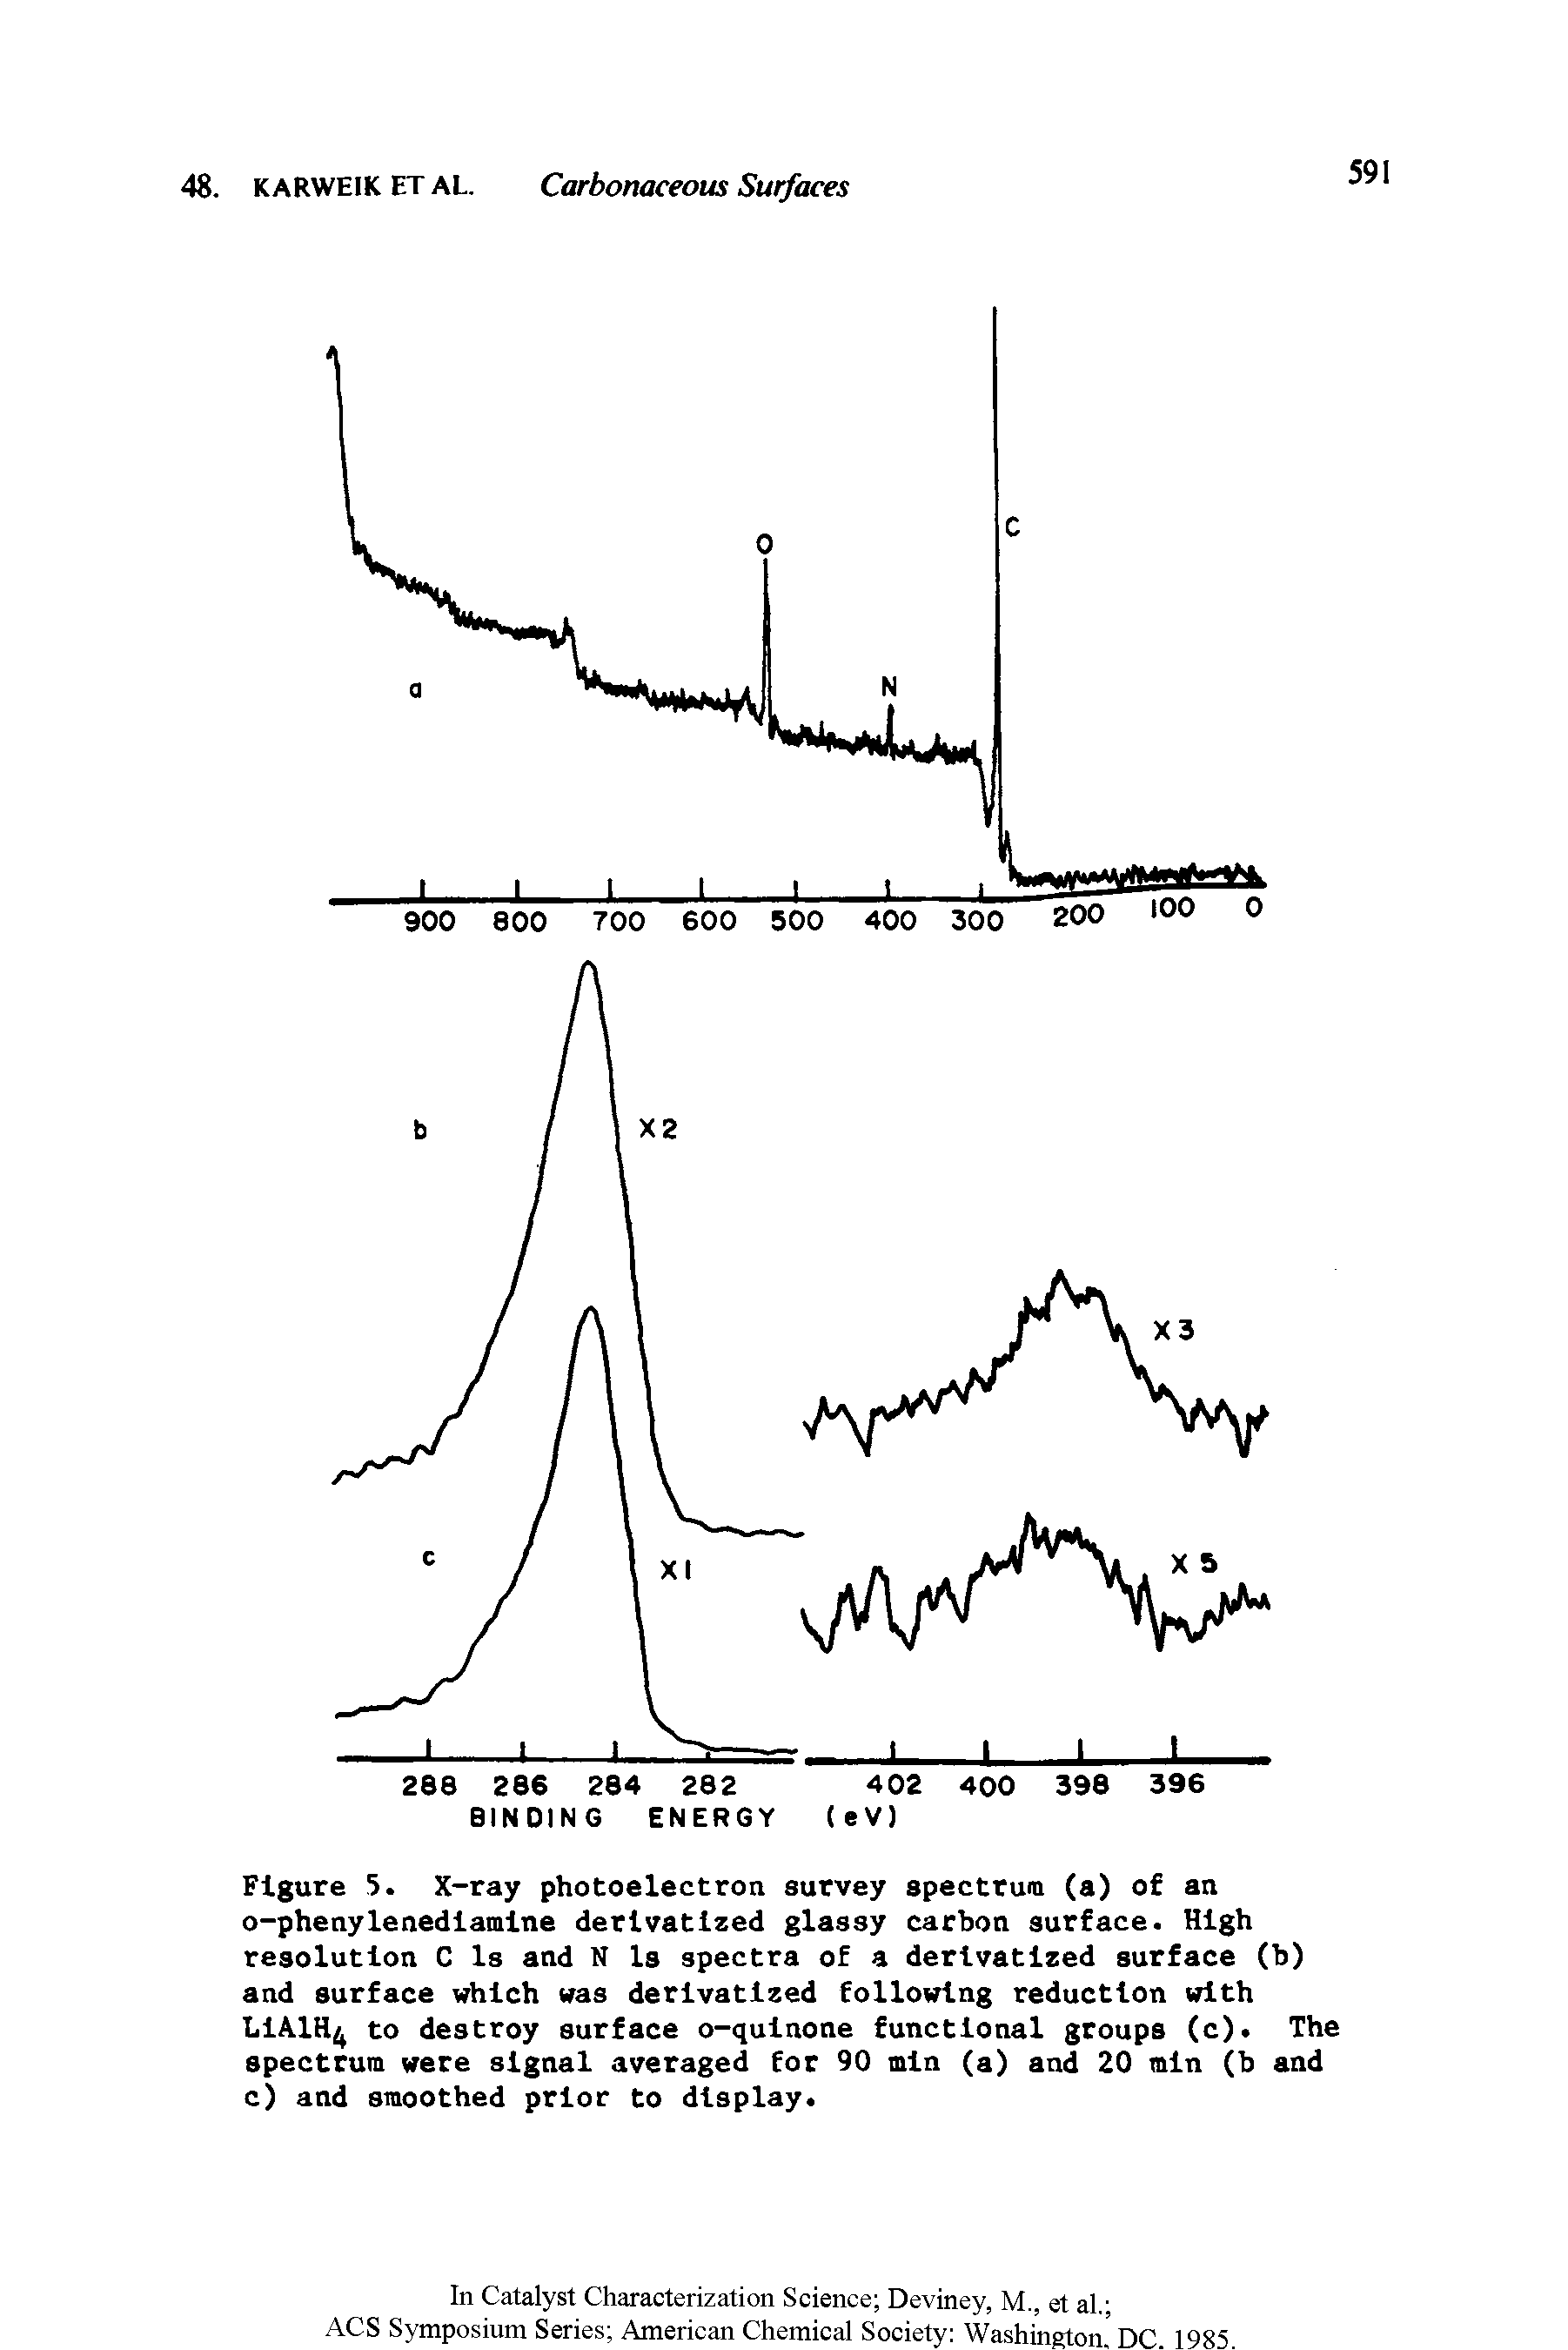 Figure 5. X-ray photoelectron survey spectrum (a) of an o-phenylenedlamlne derlvatlzed glassy carbon surface. High resolution C Is and N Is spectra of a derlvatlzed surface (b) and surface which was derlvatlzed following reduction with lilAlH to destroy surface o-qulnone functional groups (c). The spectrum were signal averaged for 90 min (a) and 20 min (b and c) and smoothed prior to display.